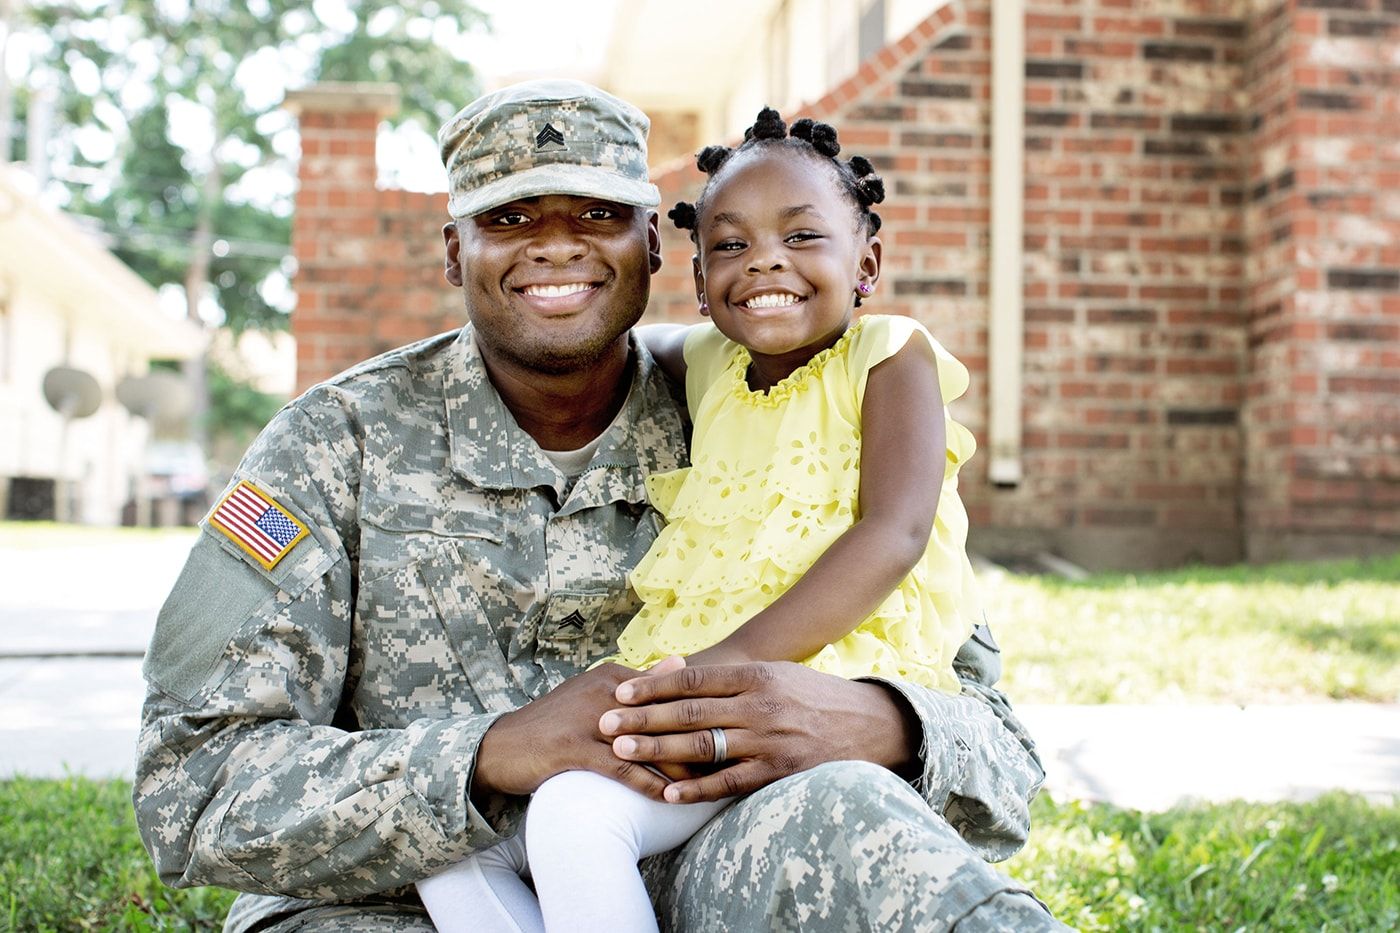 A military father smiles while his daughter wearing a yellow dress sits on his lap outside.